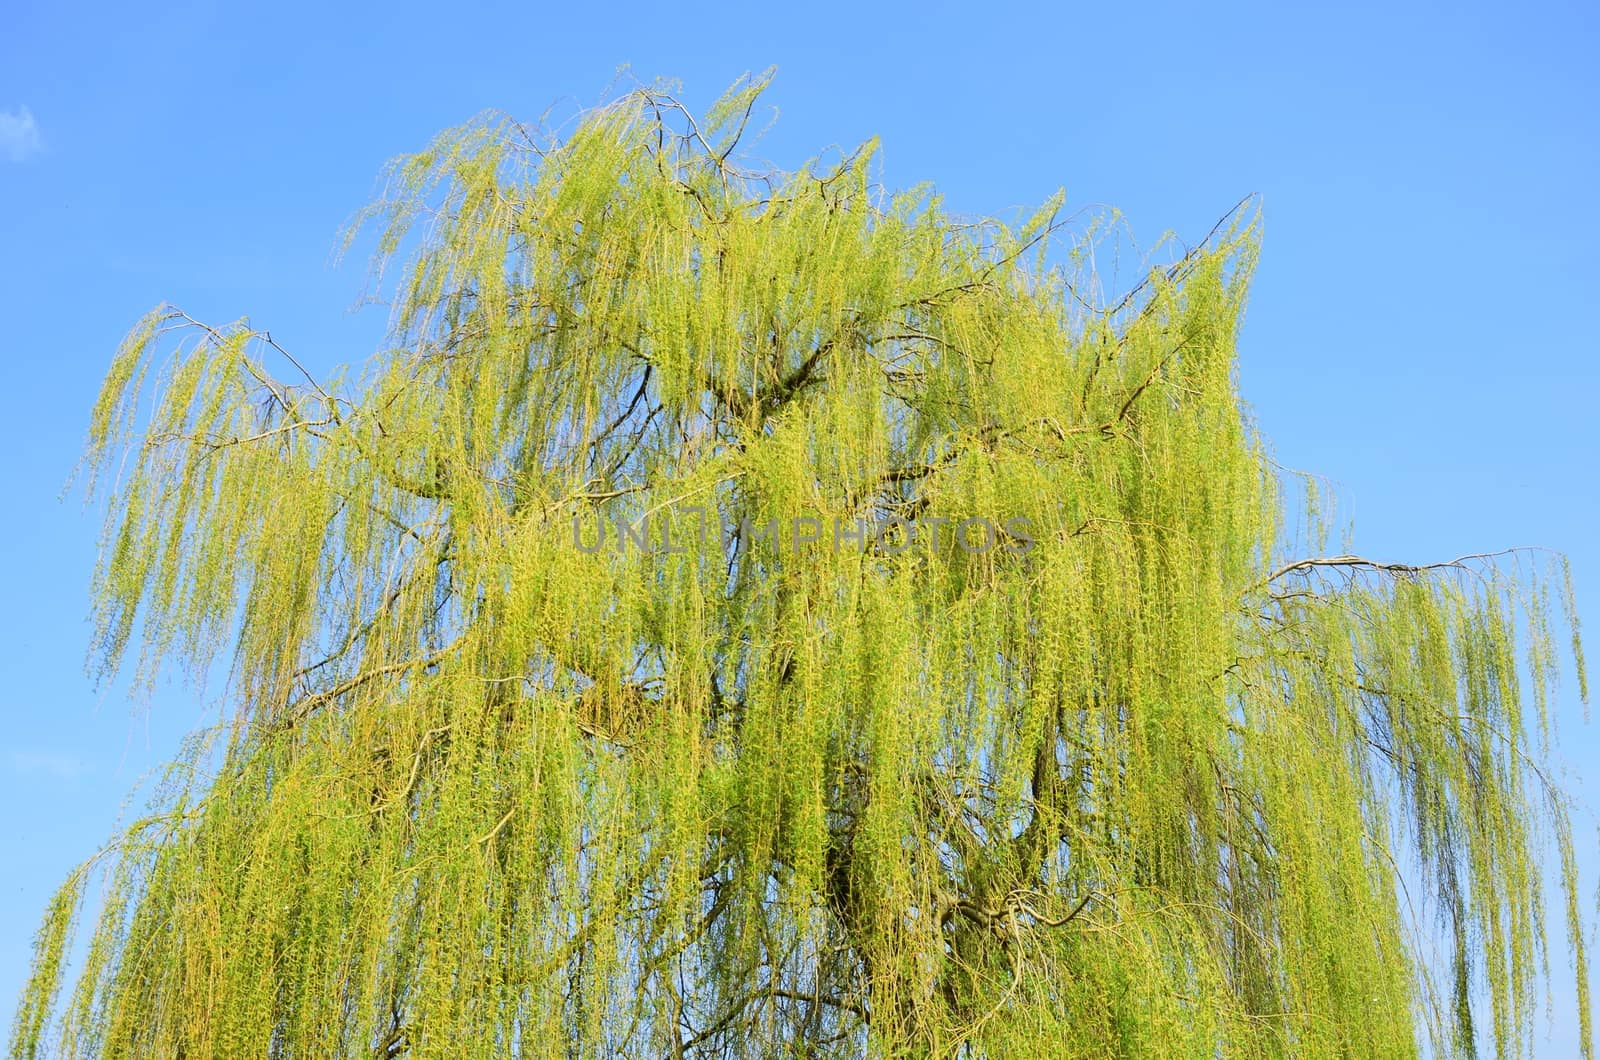 Willow tree with Blue sky by pauws99